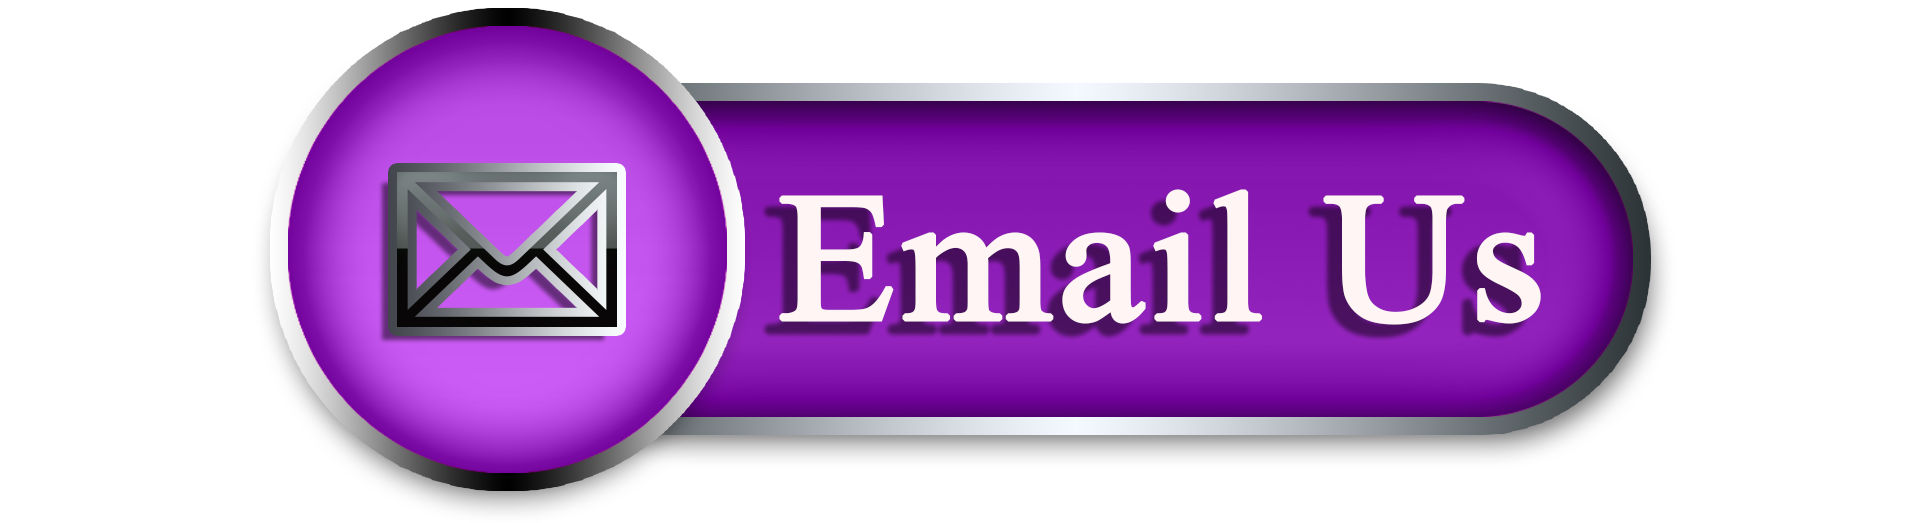 Purple and black email us image with an envelope on the Pro Tax & Accounting Contact Us page